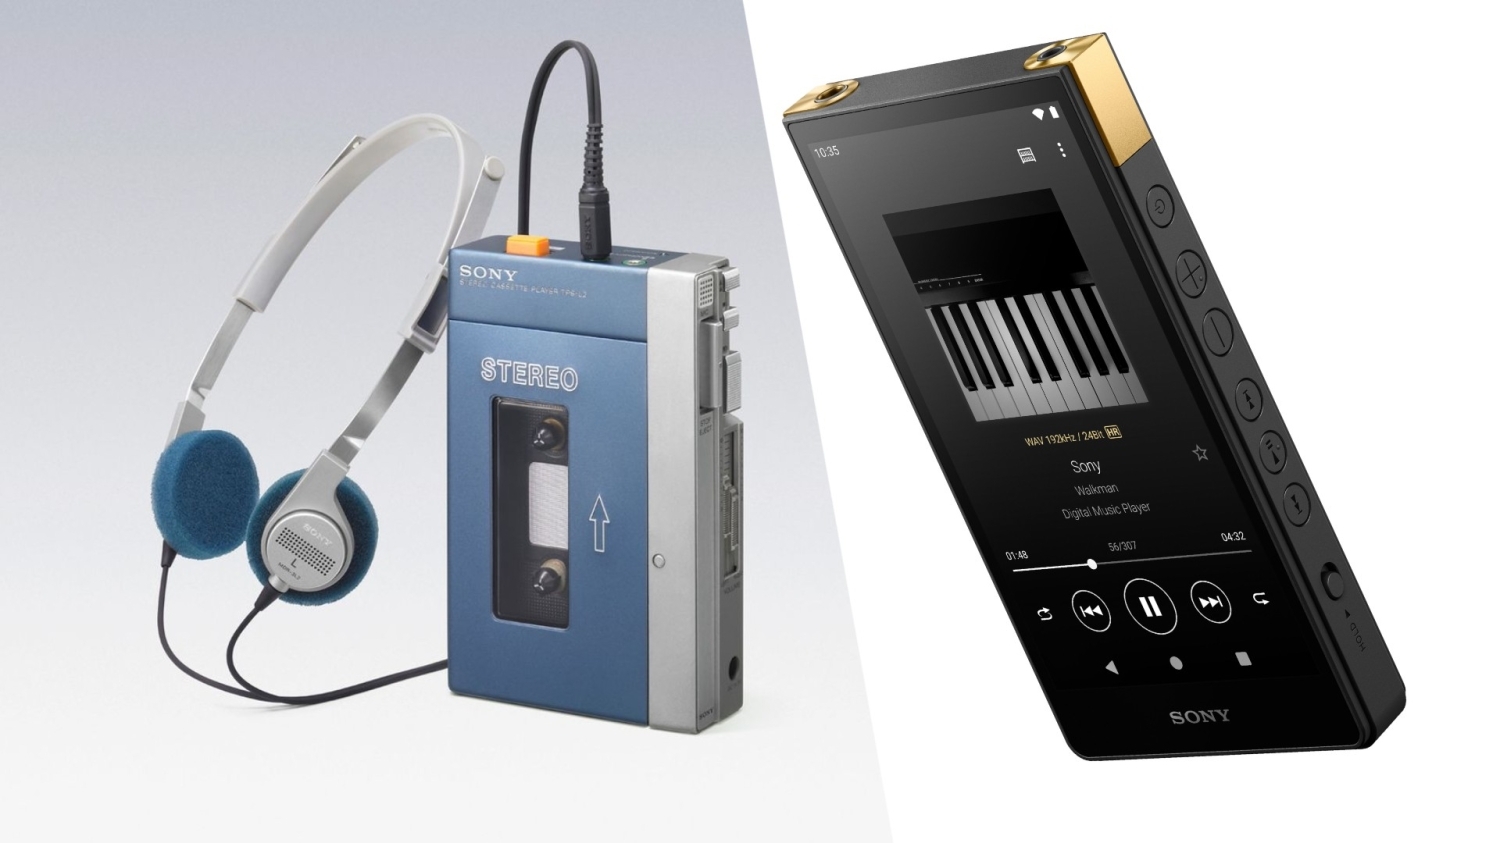 Sony Ericsson Officially Announces W880 & W610 Walkman Phones > FutureMusic  the latest news on future music technology DJ gear producing dance music  edm and everything electronic